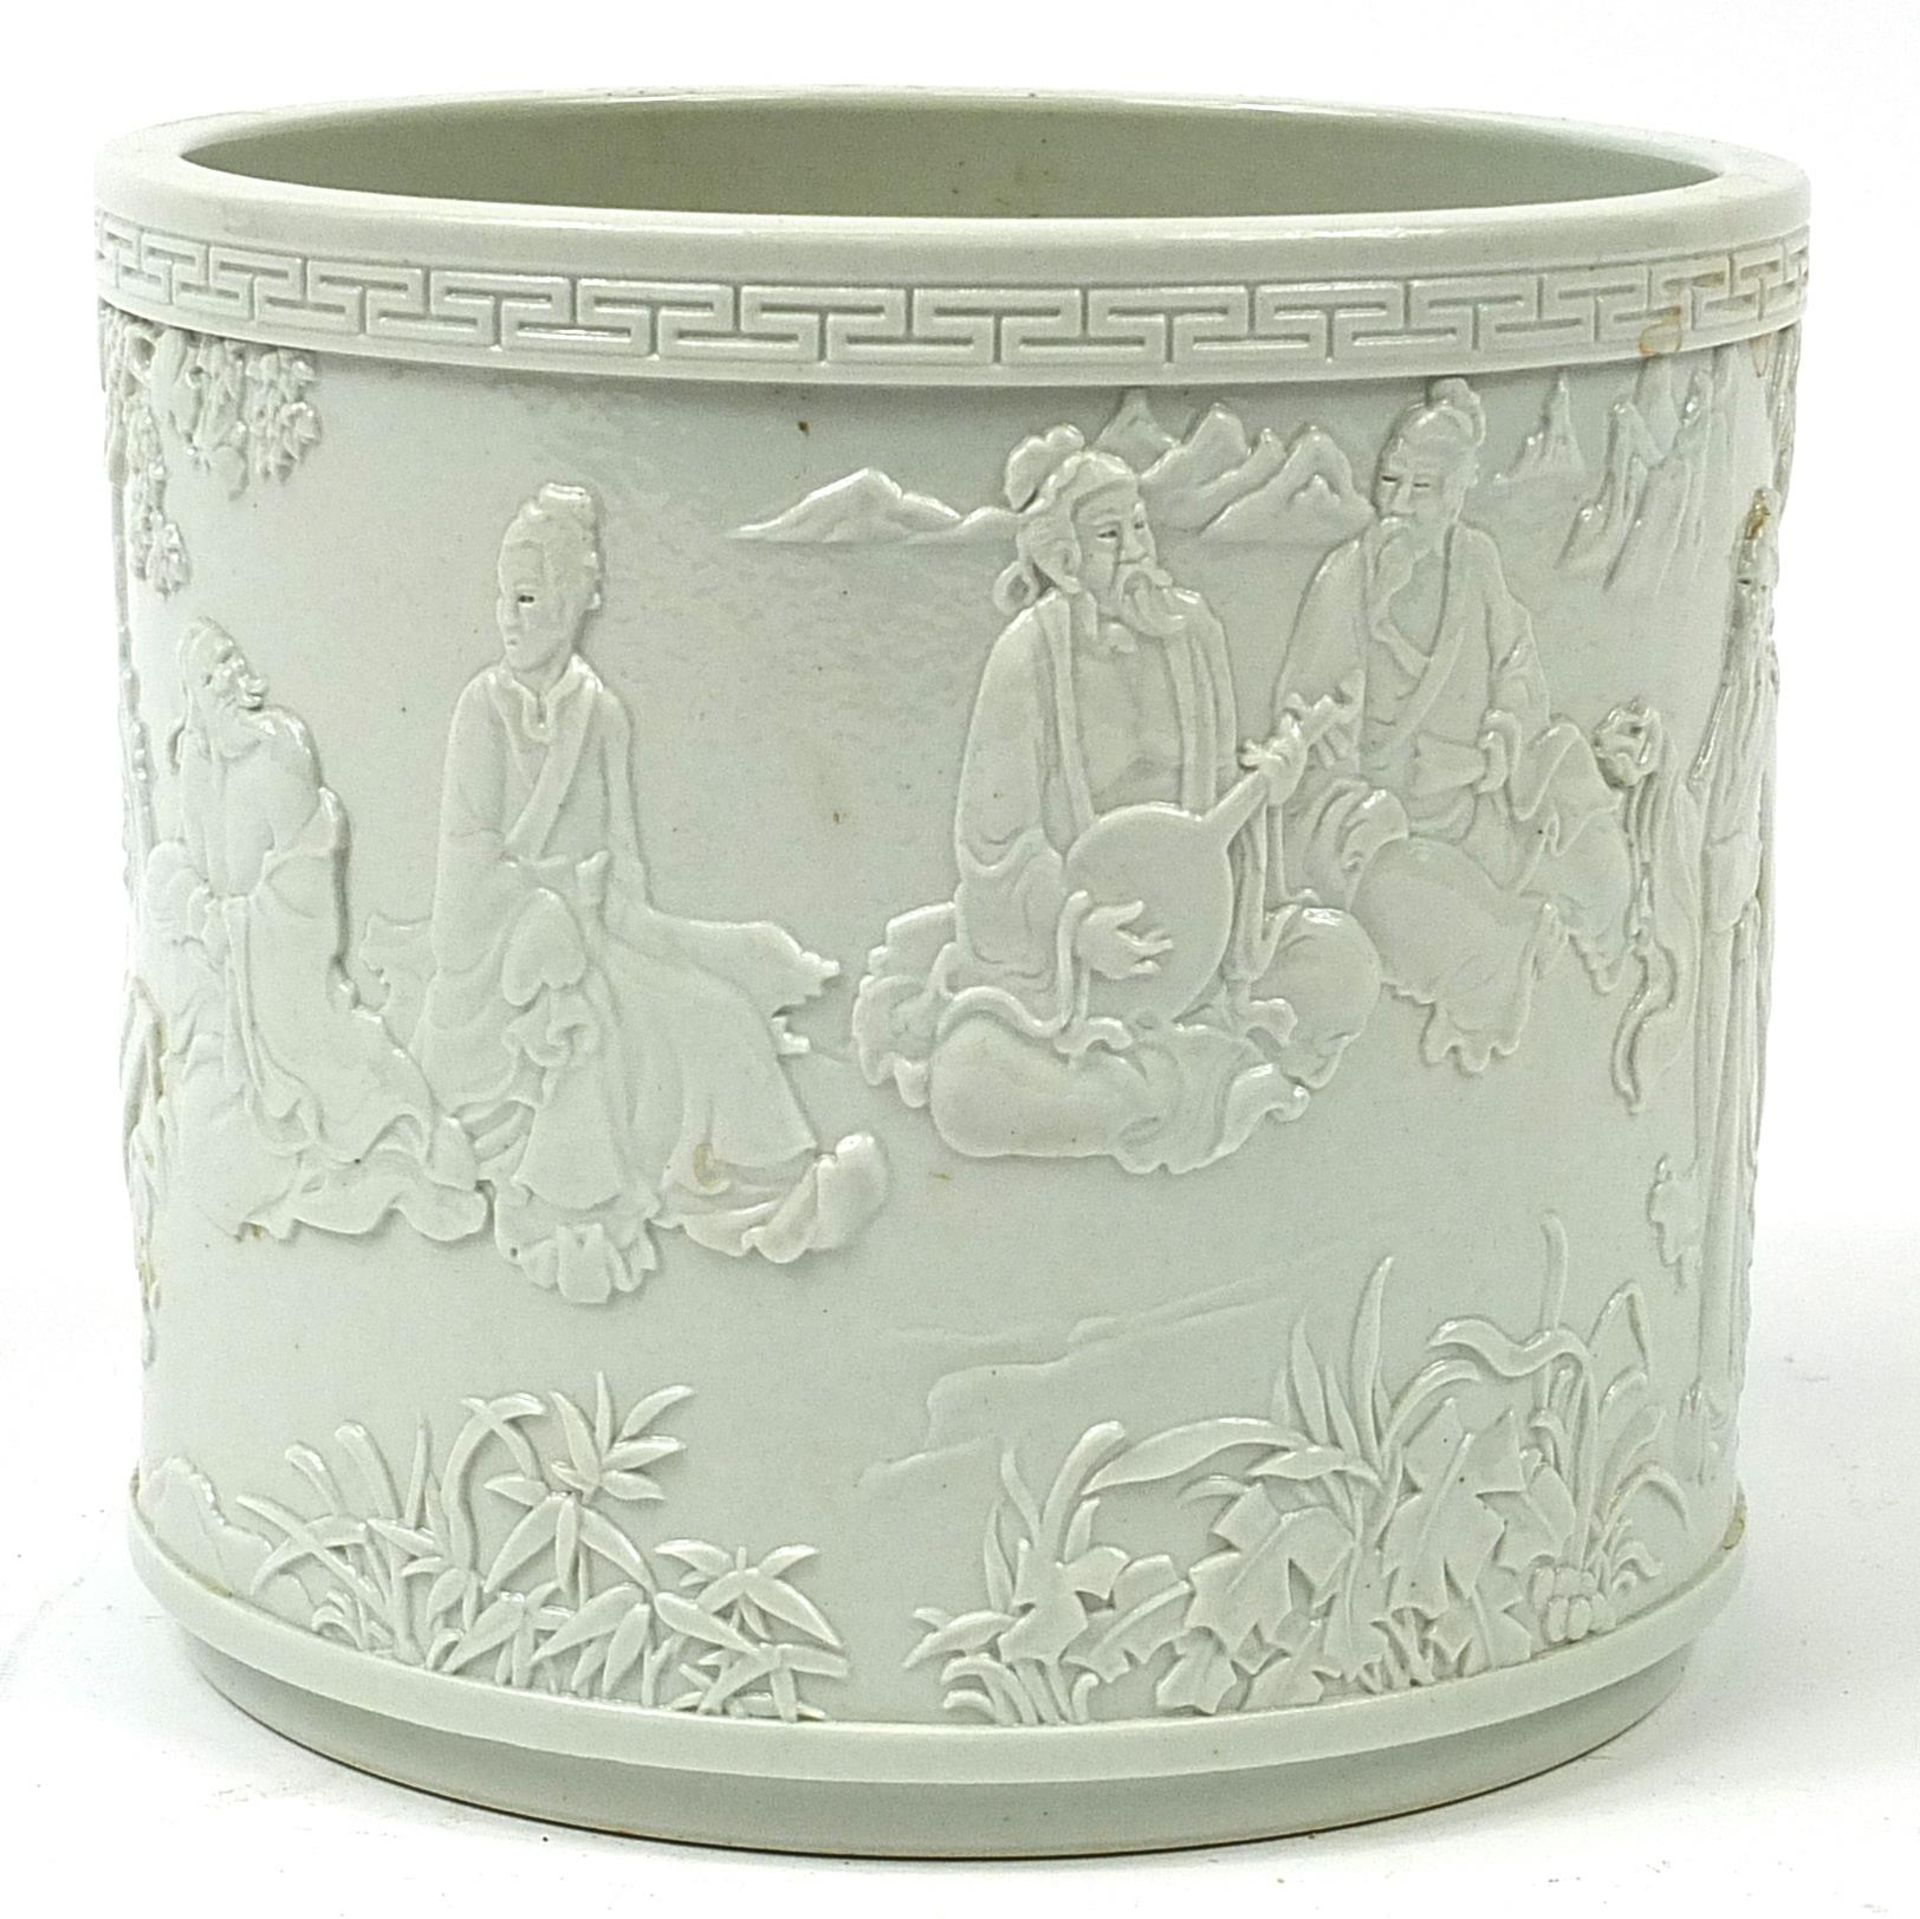 Chinese porcelain blanc de chine brush pot decorated in relief with an Emperor and figures in a